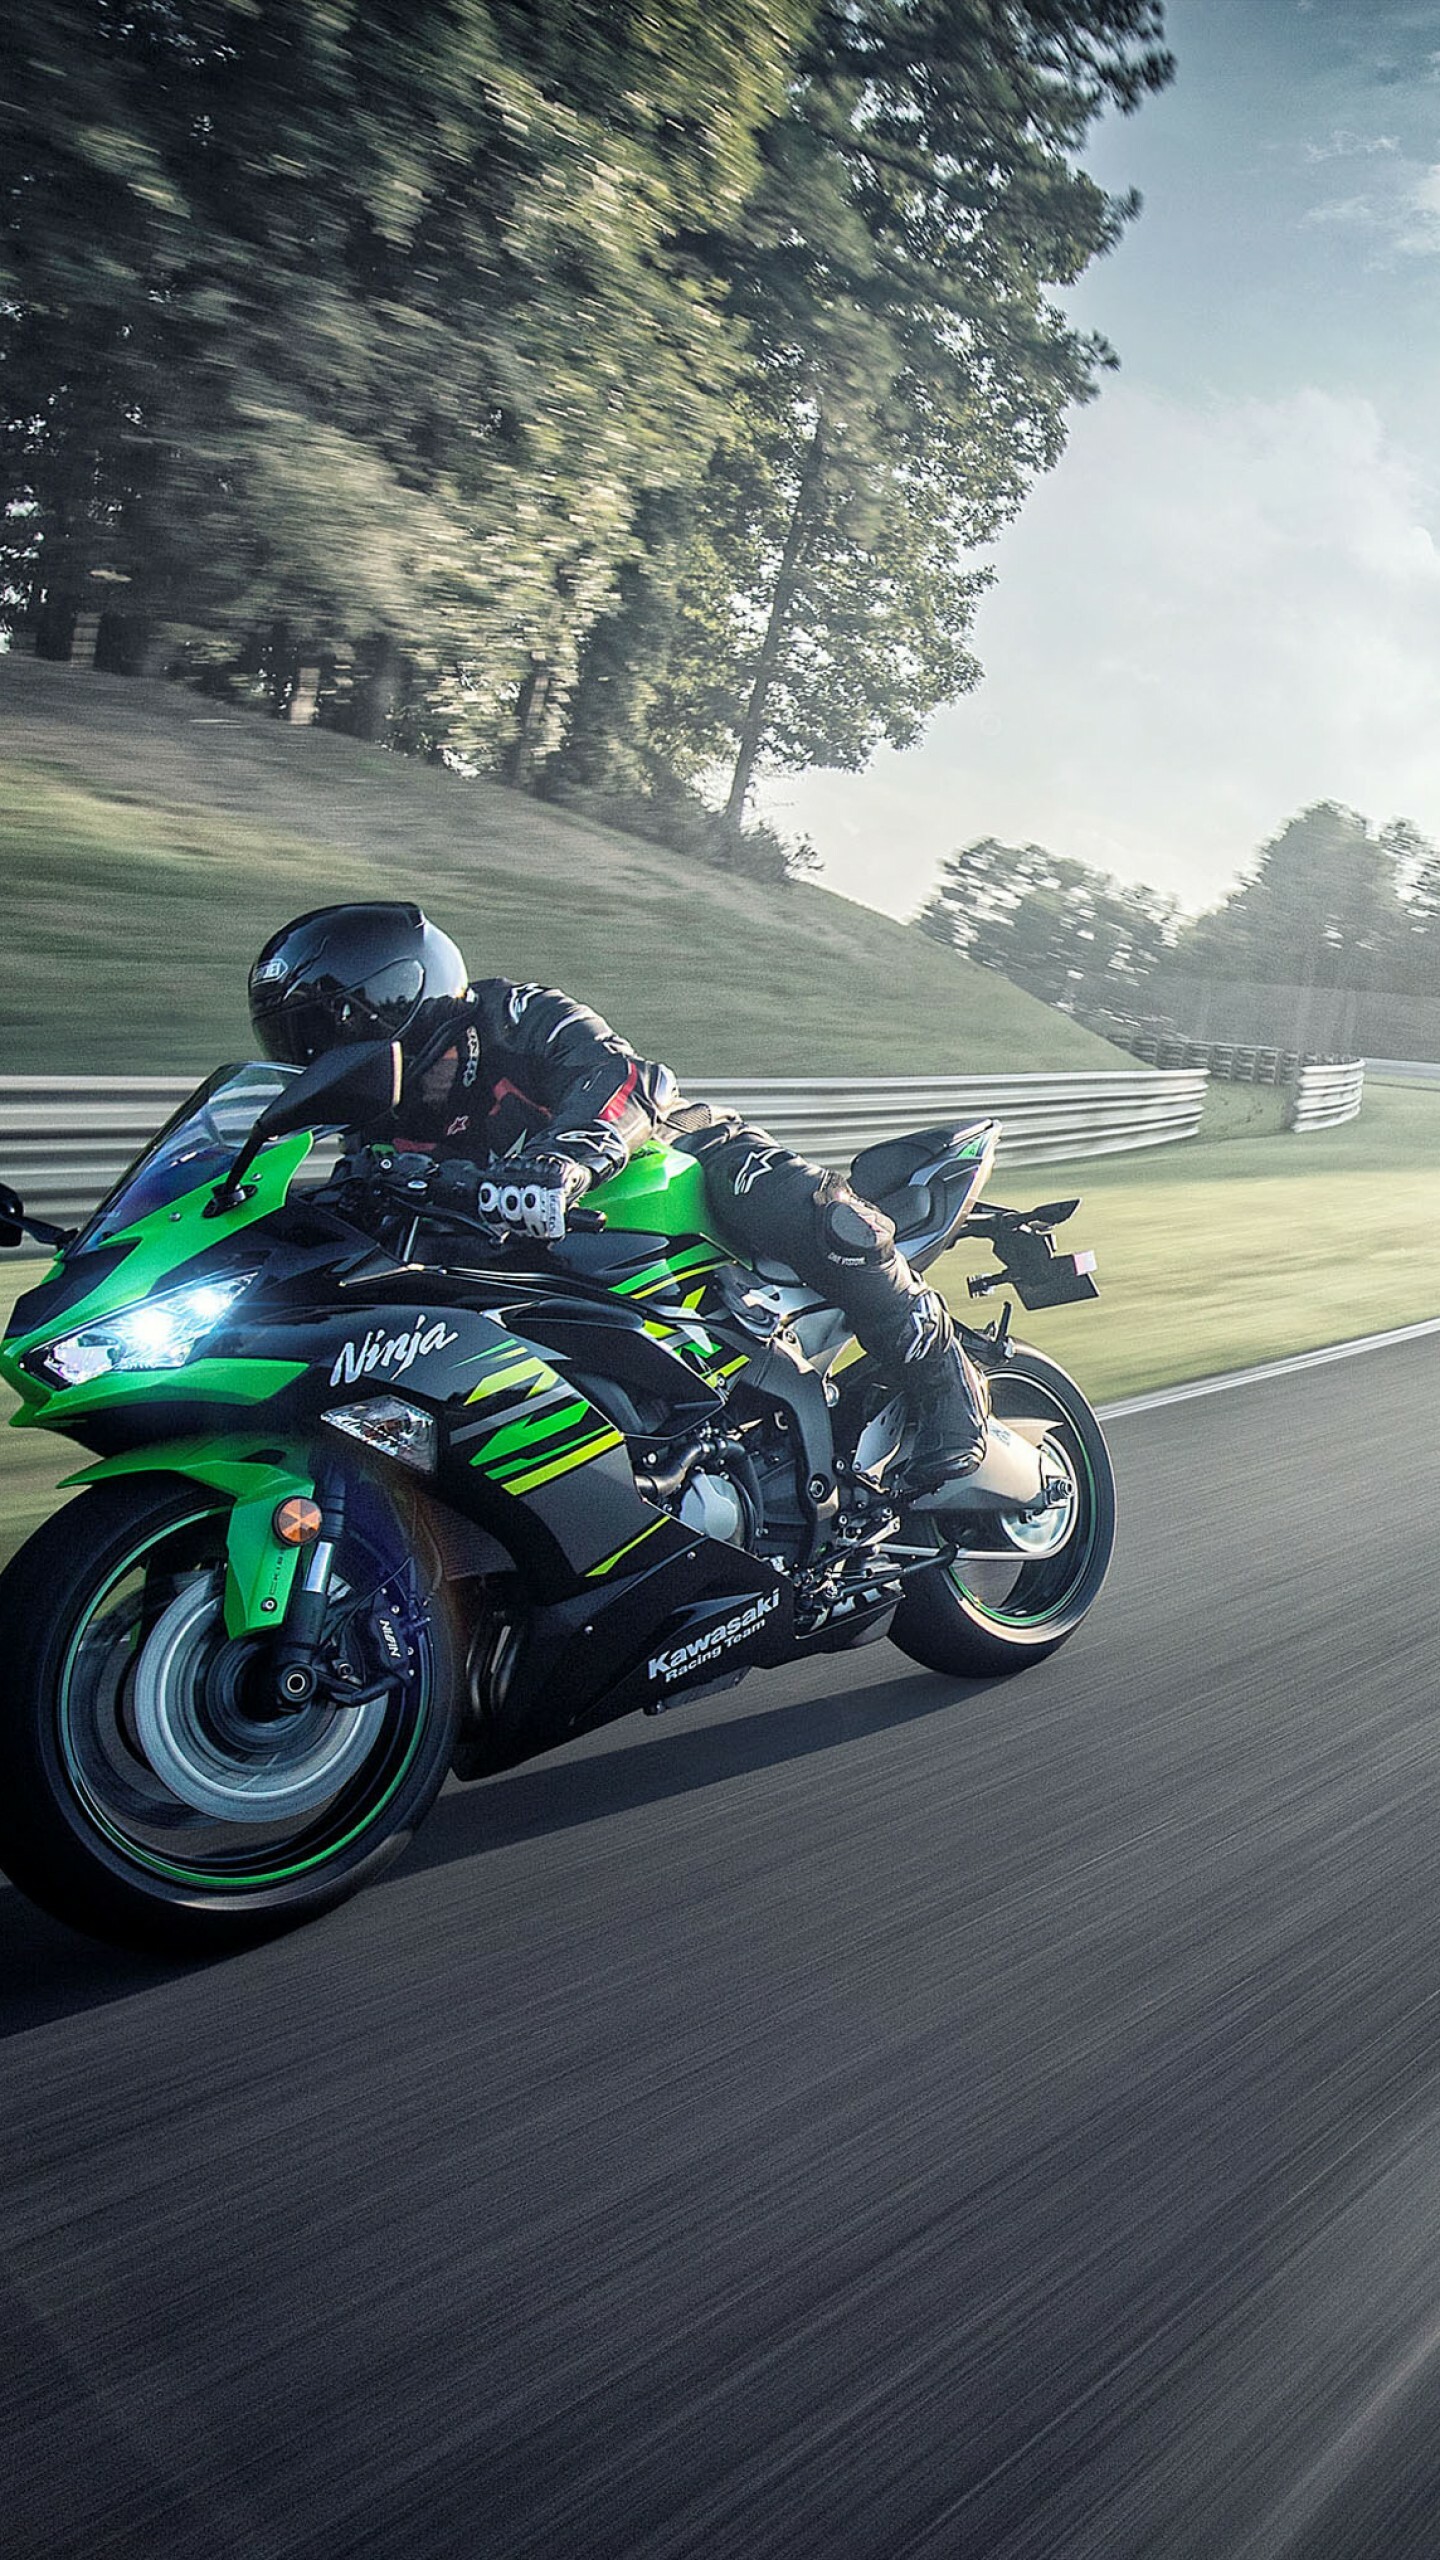 Kawasaki Ninja ZX: ZX-6R, Designed to embody superior performance on track, and on the street, Japanese bike. 1440x2560 HD Wallpaper.